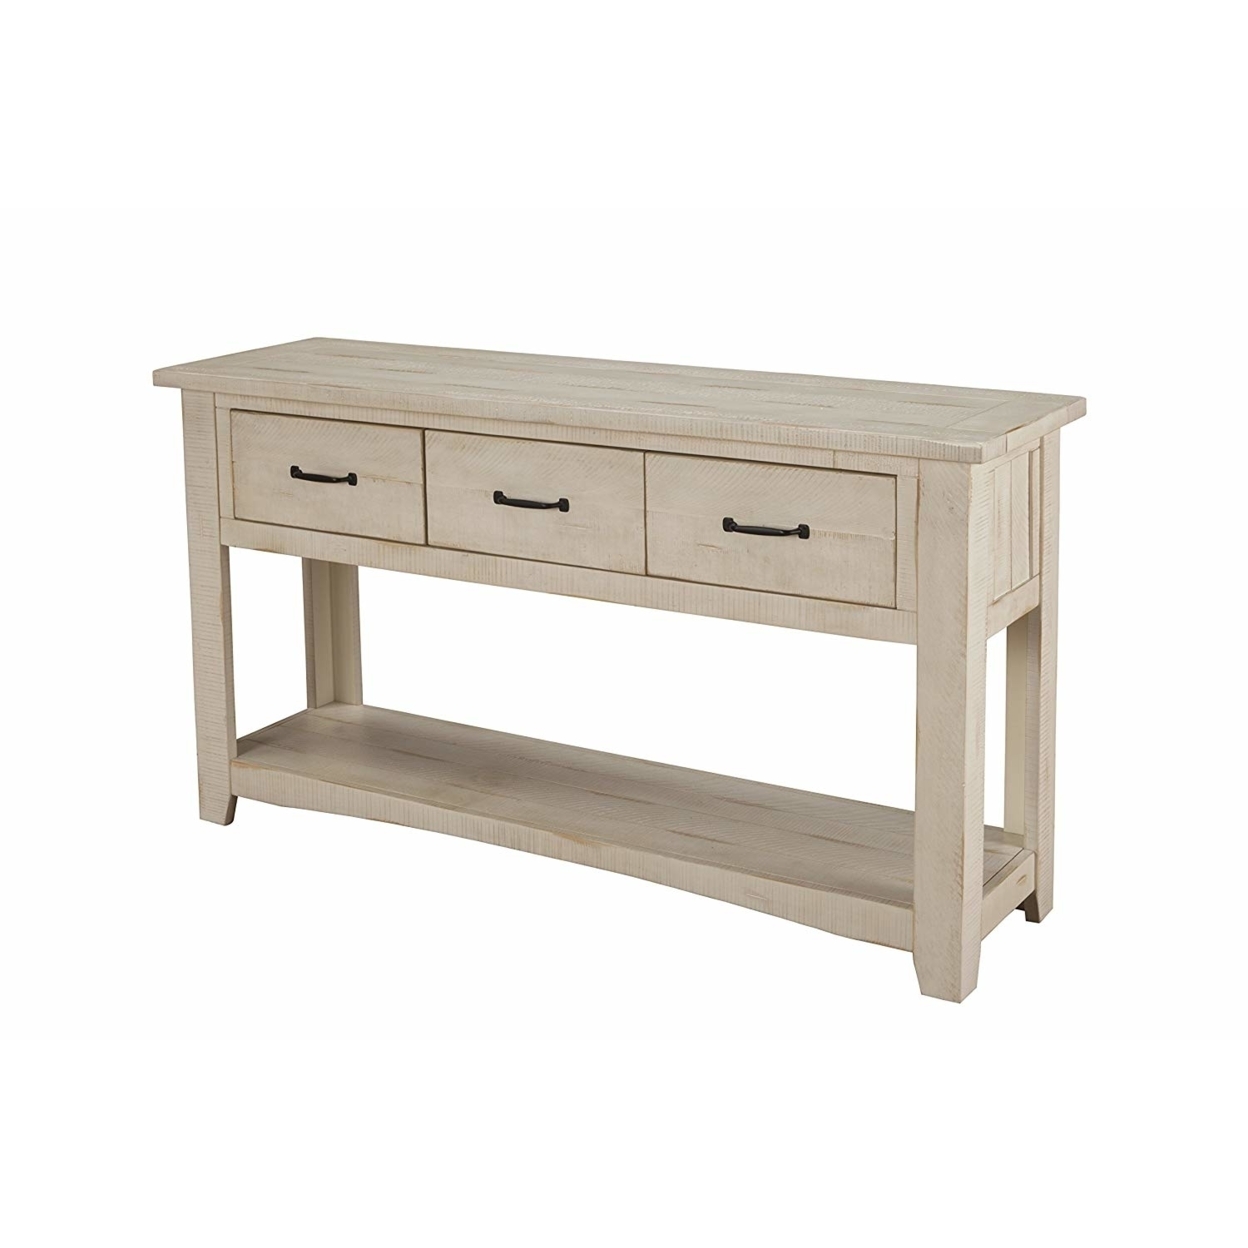 Wooden Console Table With Three Drawers, Antique White- Saltoro Sherpi